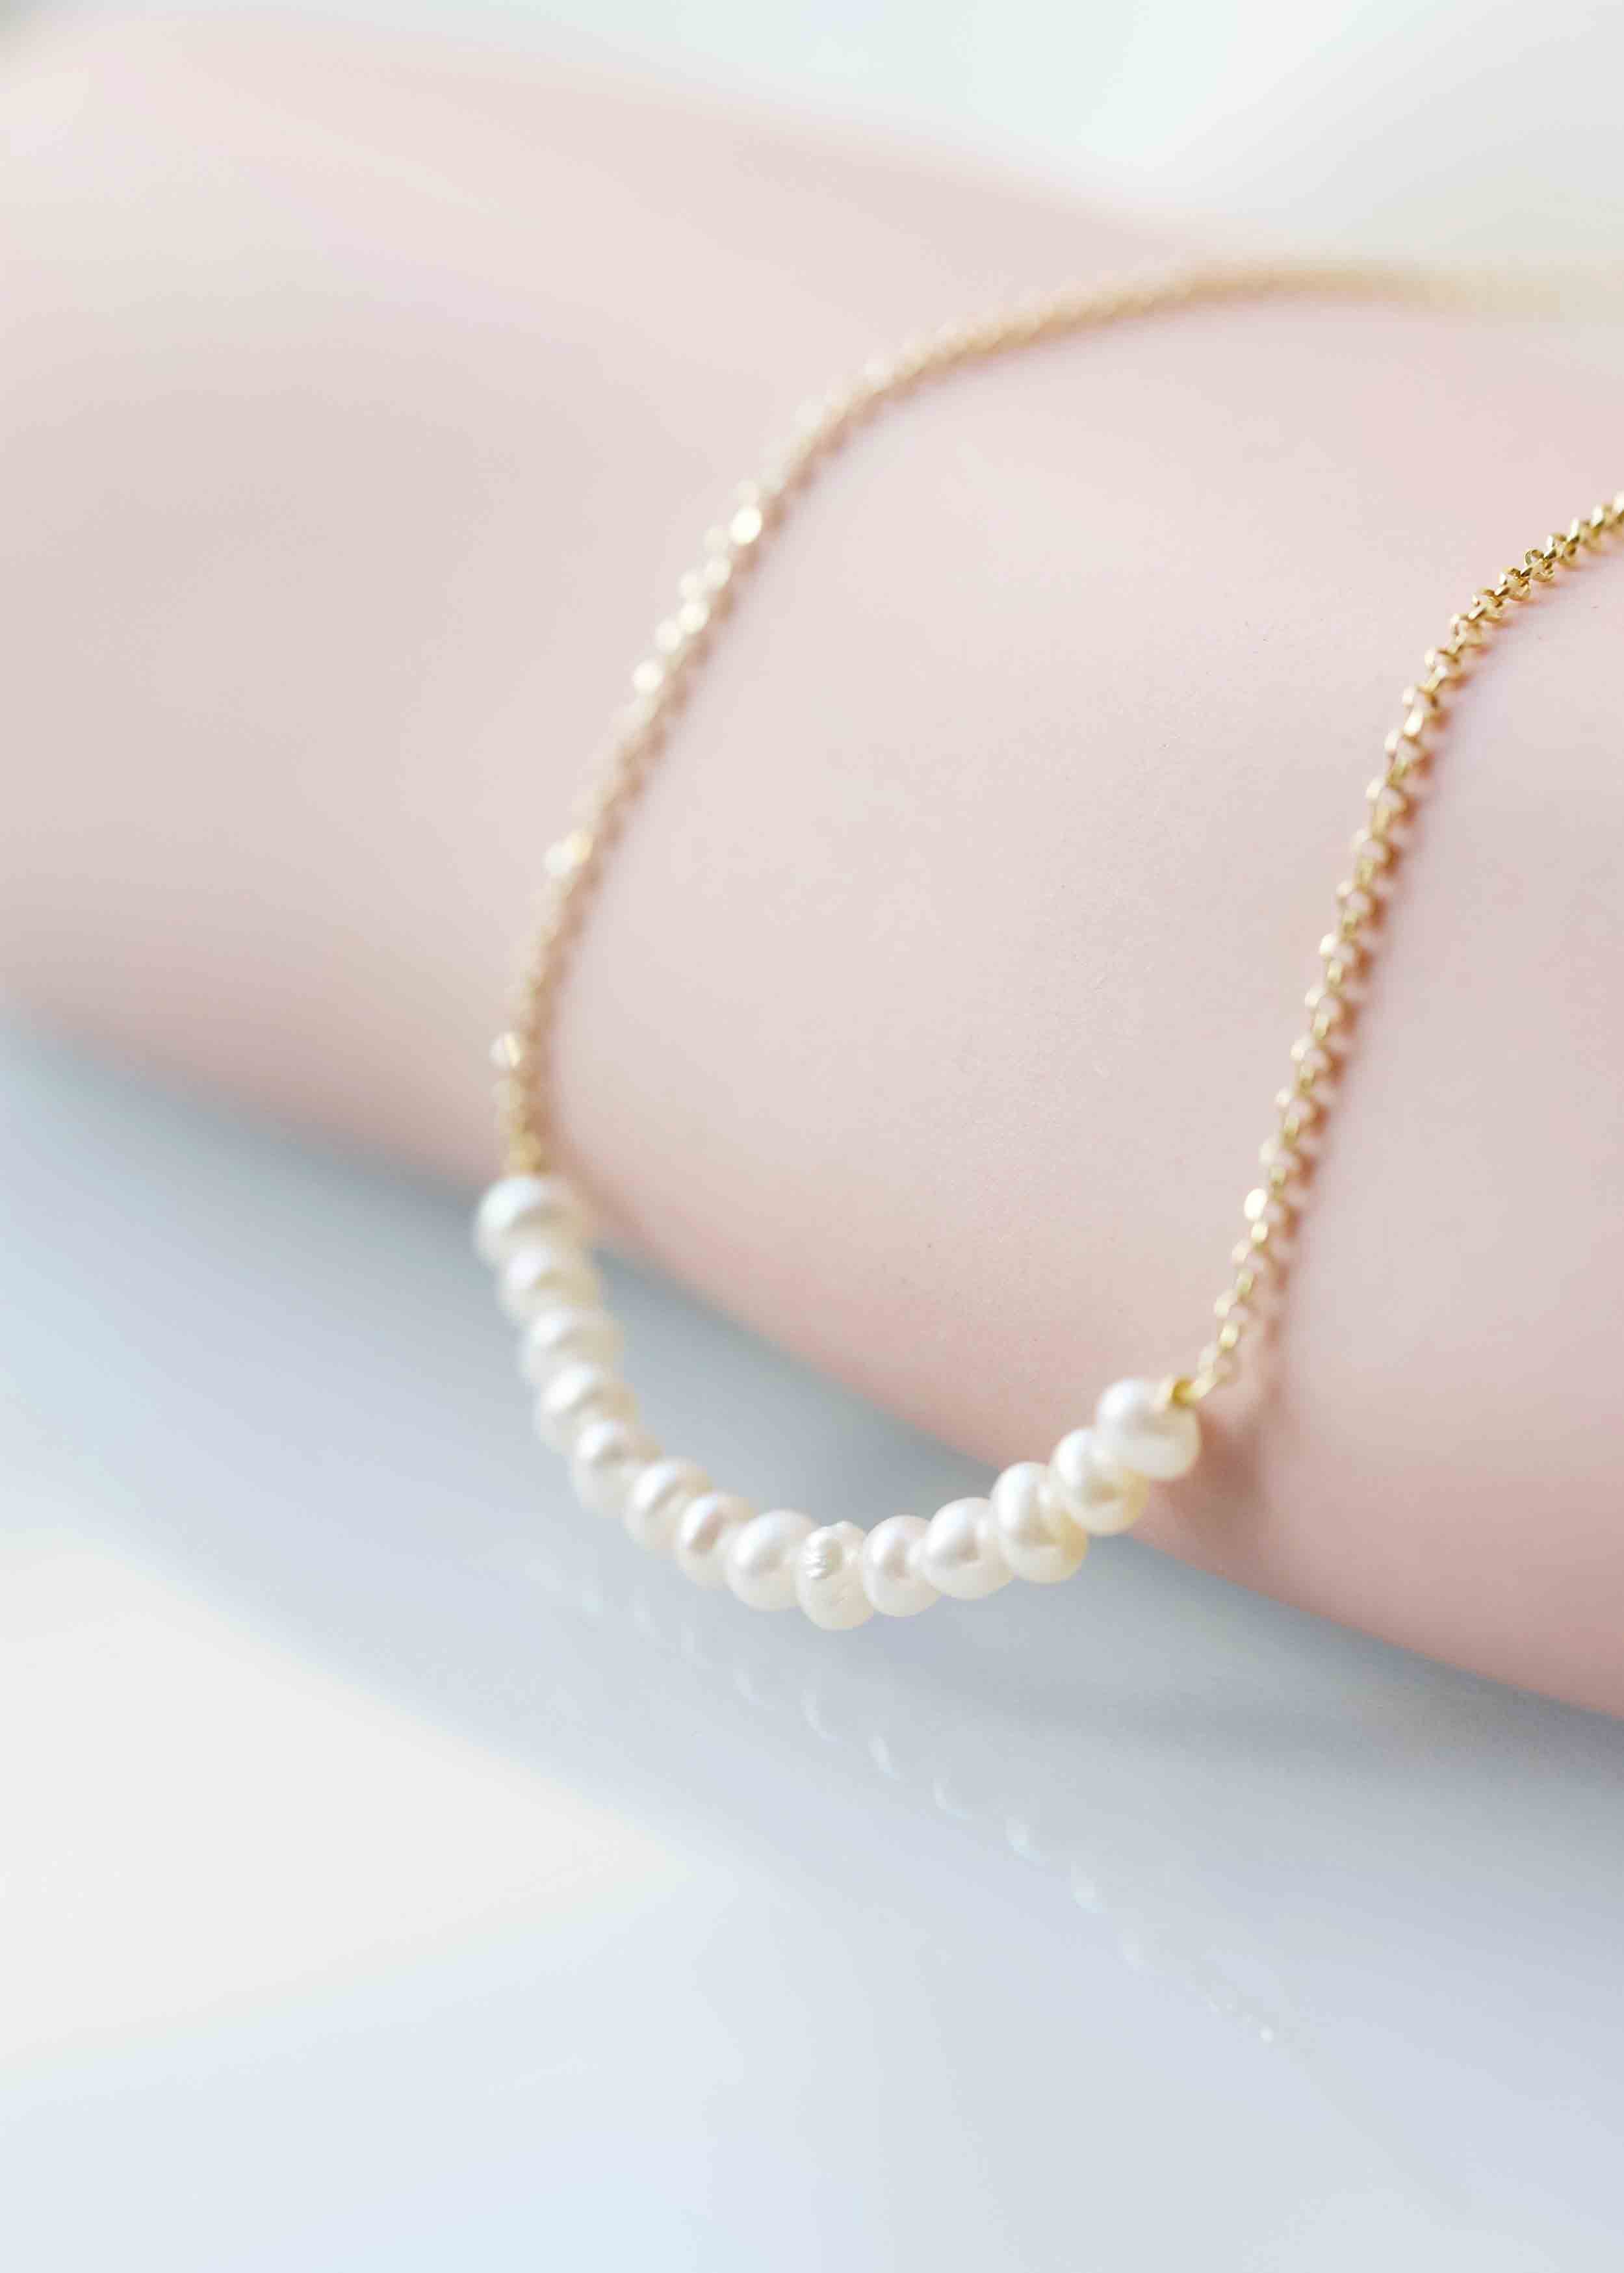 Pearl gold Necklace, bridal necklace, pearl bar necklace, wedding gift bridesmaids